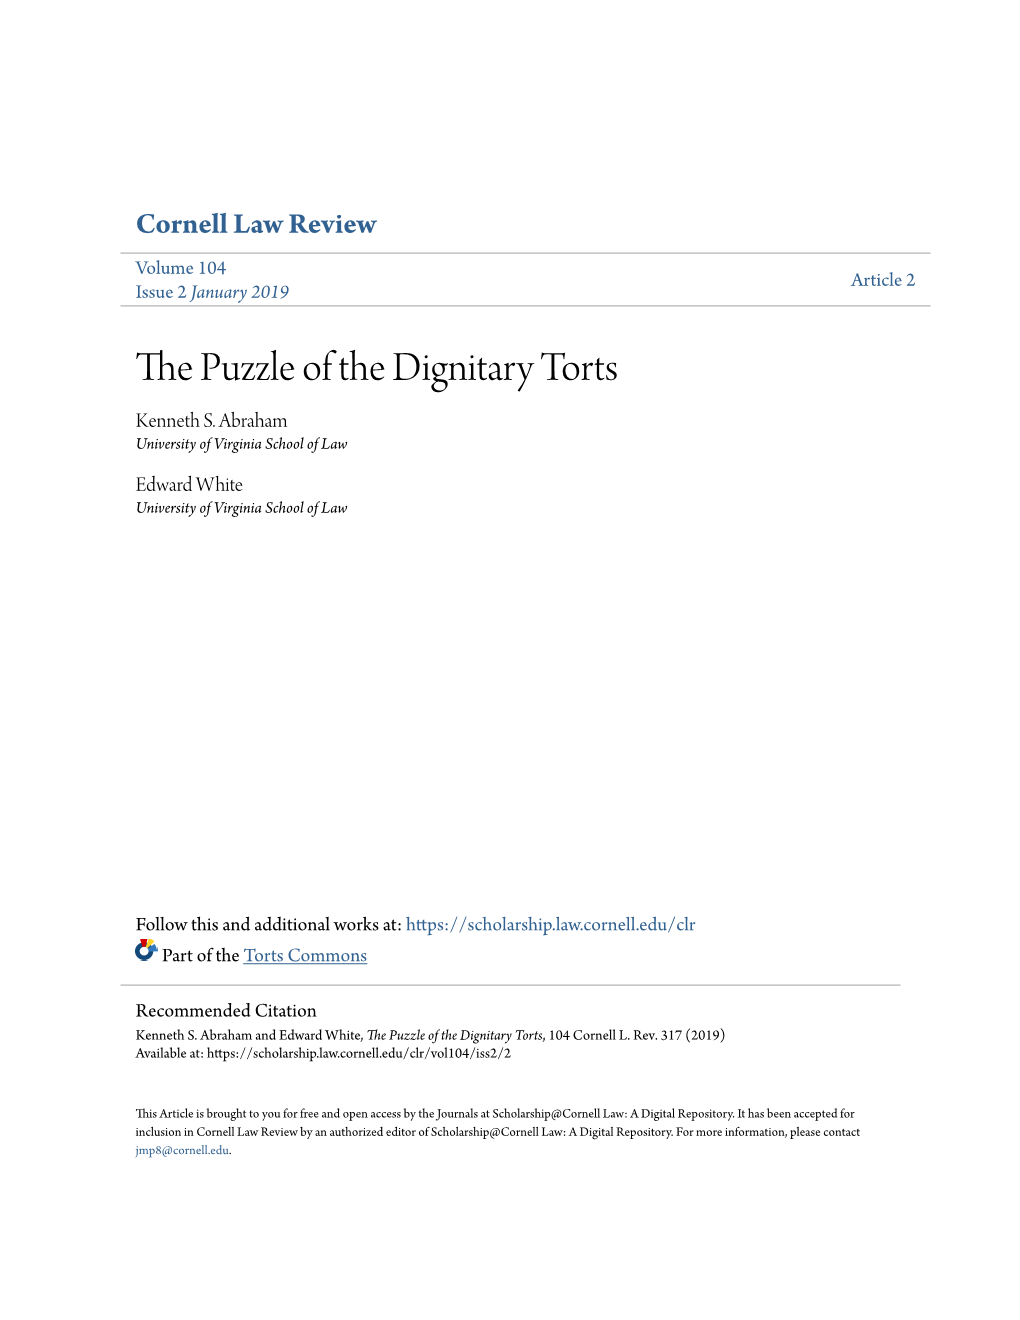 The Puzzle of the Dignitary Torts Kenneth S